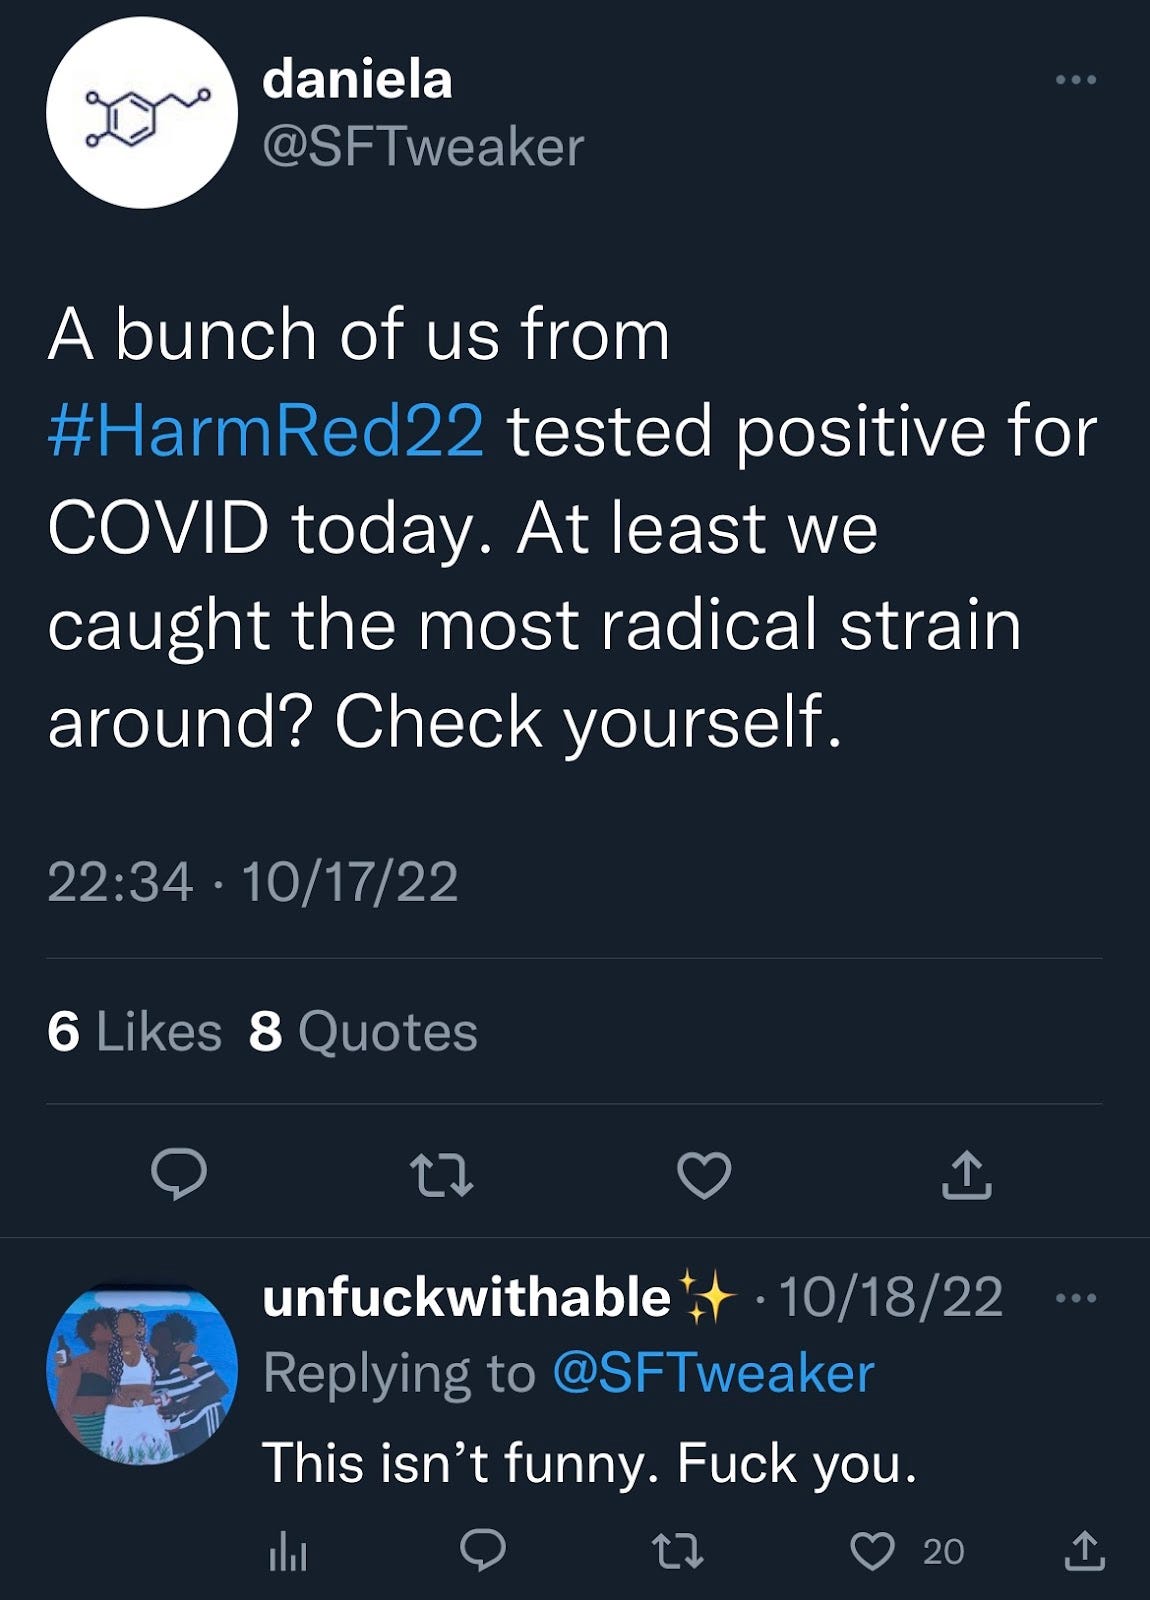 screenshot tweet from @SFTweaker: “A bunch of us from #HarmRed22 tested positive for COVID today. At least we caught the most radical strain around? Check yourself.” Underneath is a reply from @ngwagwa: “This isn’t funny. Fuck you.”